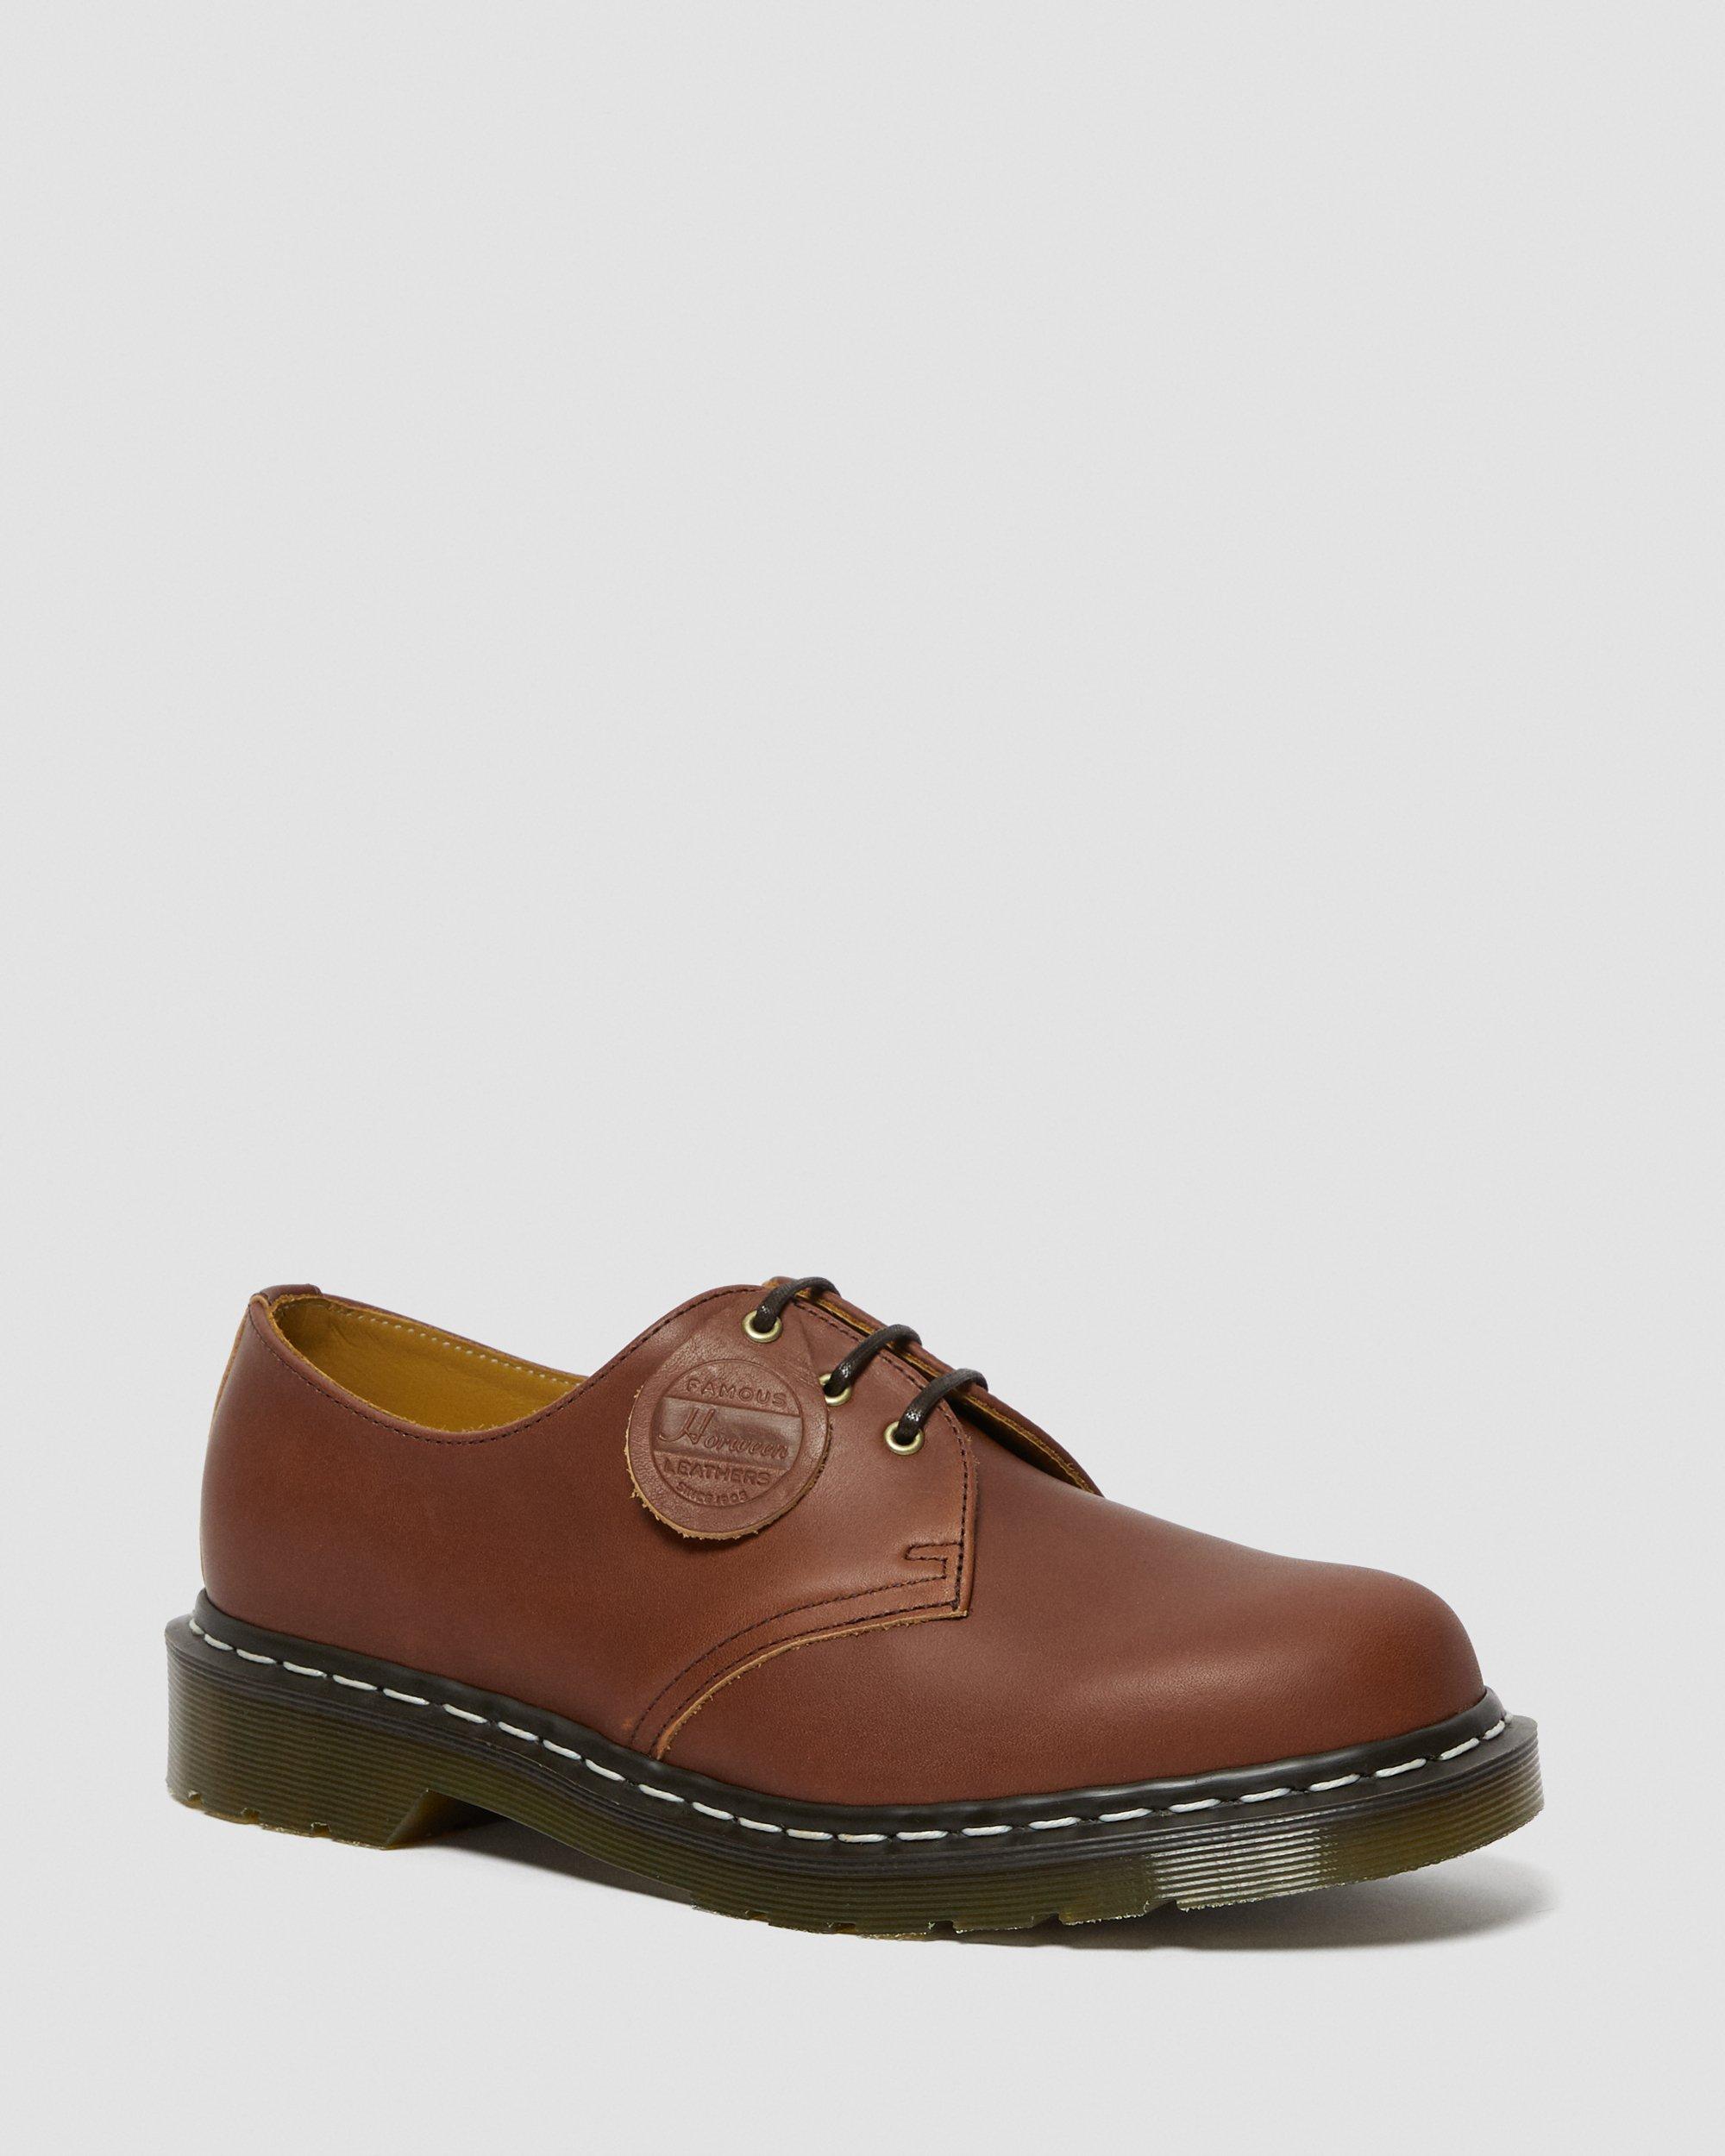 Martens Made In England 1461 Veg Tan Horween Leathers Shoes Chicago Tan ...